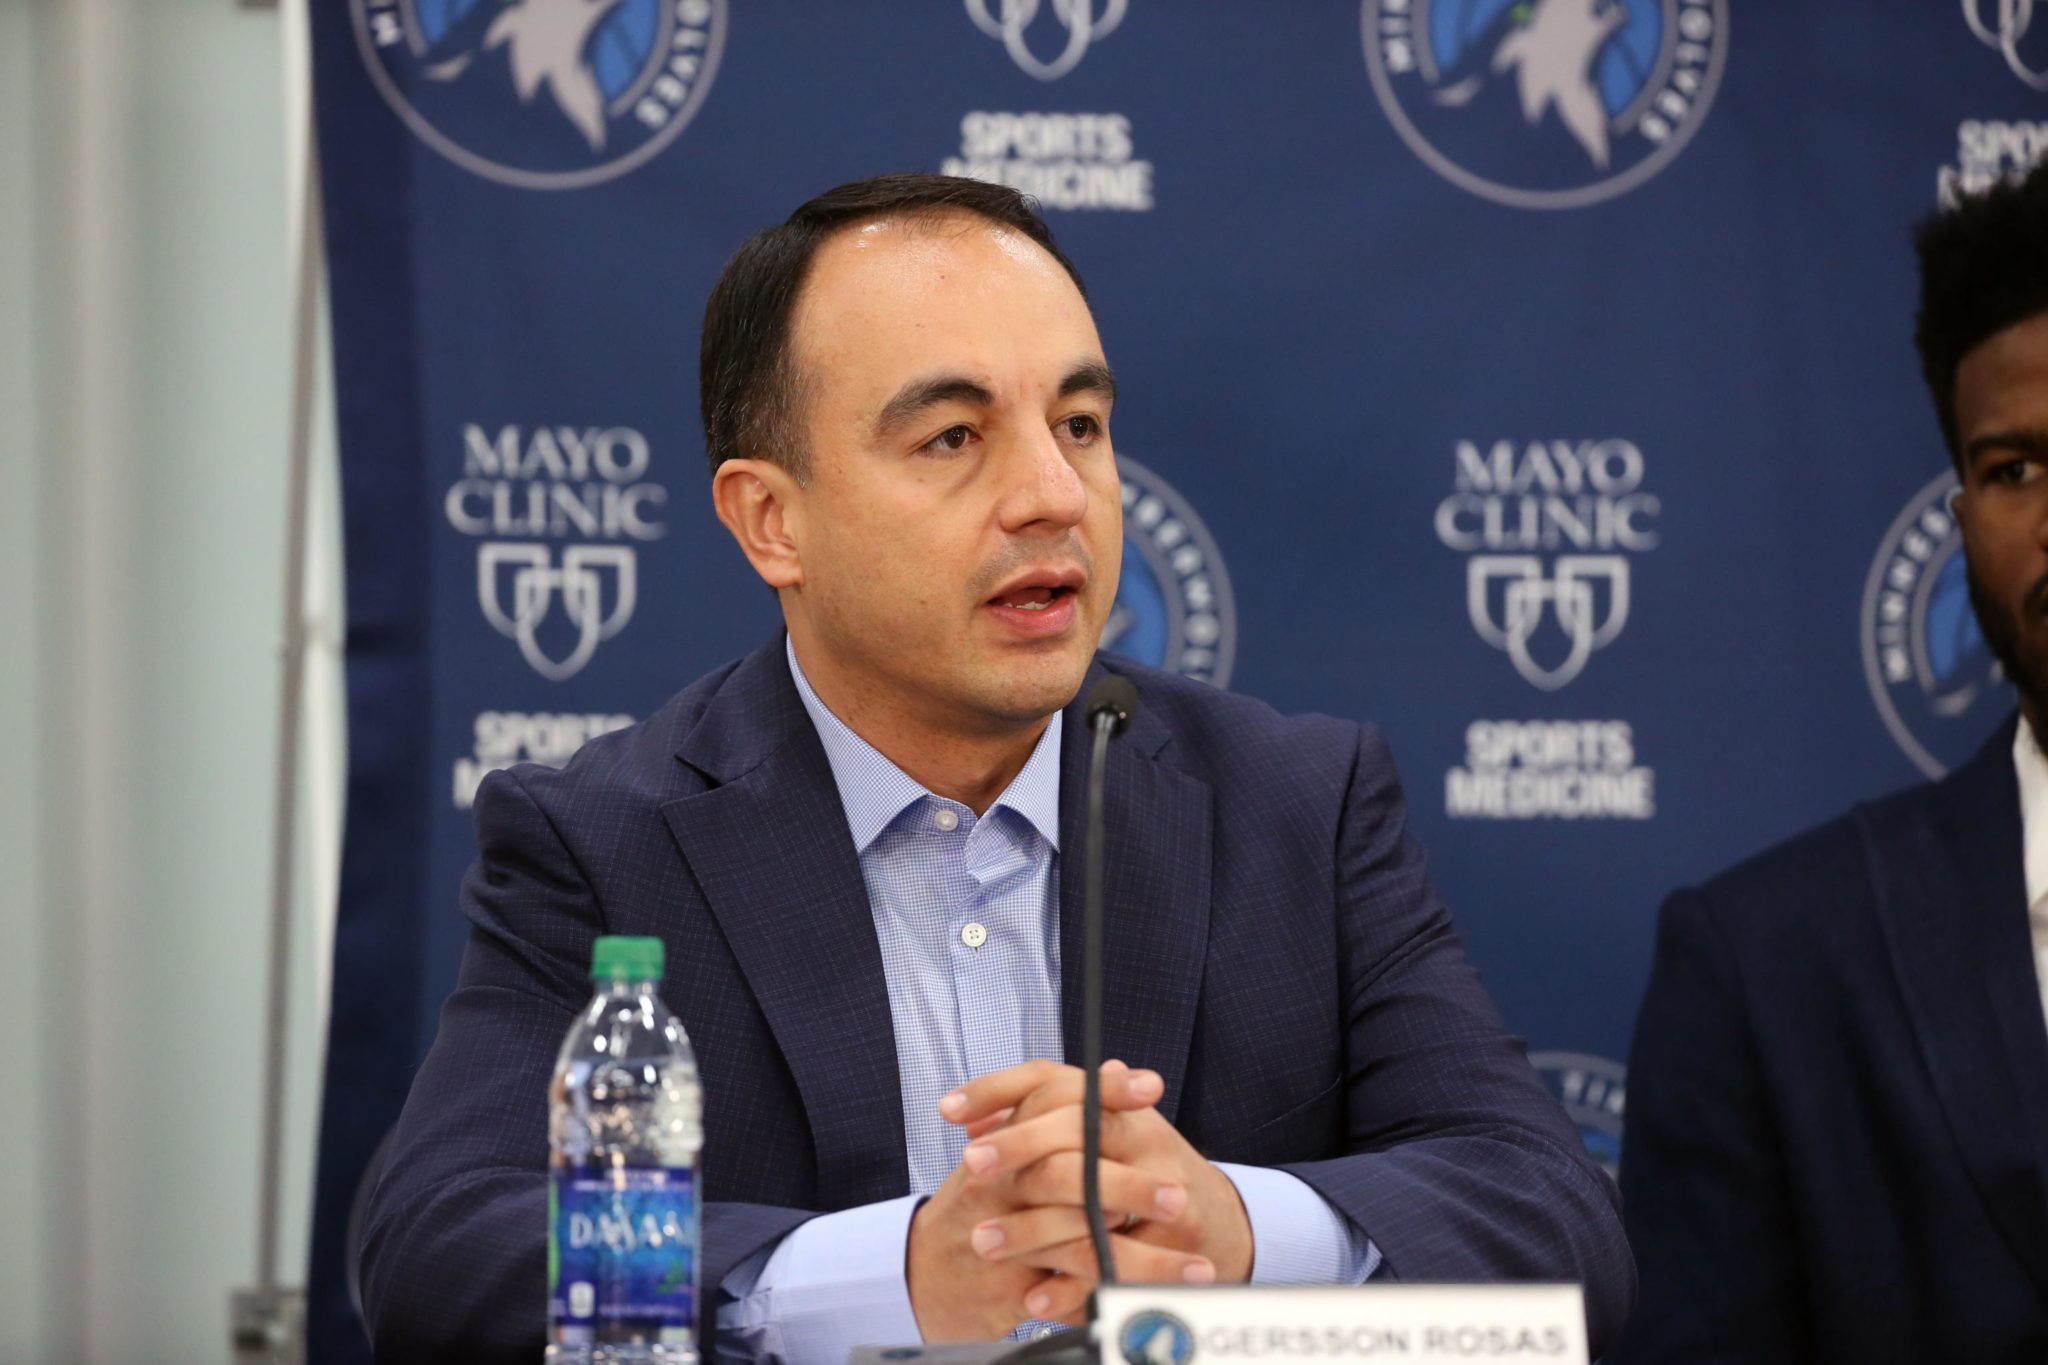 Timberwolves ‘Part Ways’ With President of Basketball Operations Gersson Rosas